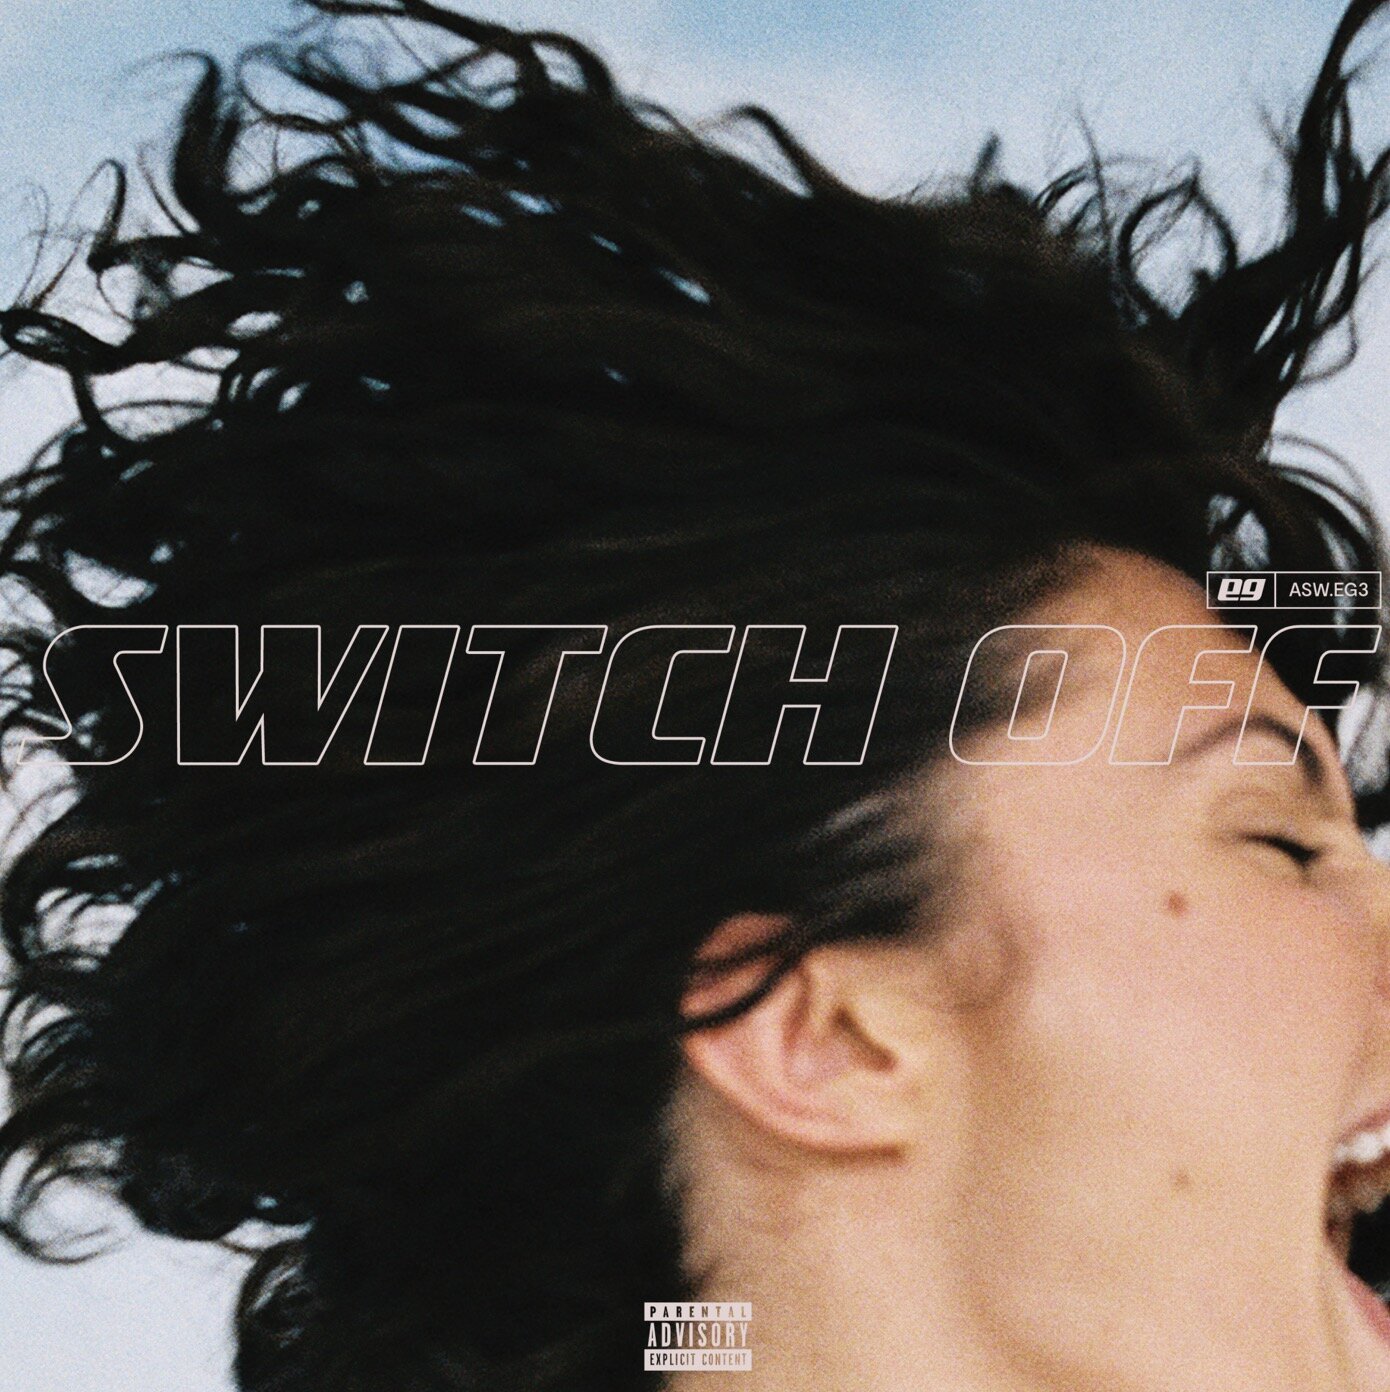 EVAN GIIA “Switch Off“ cover